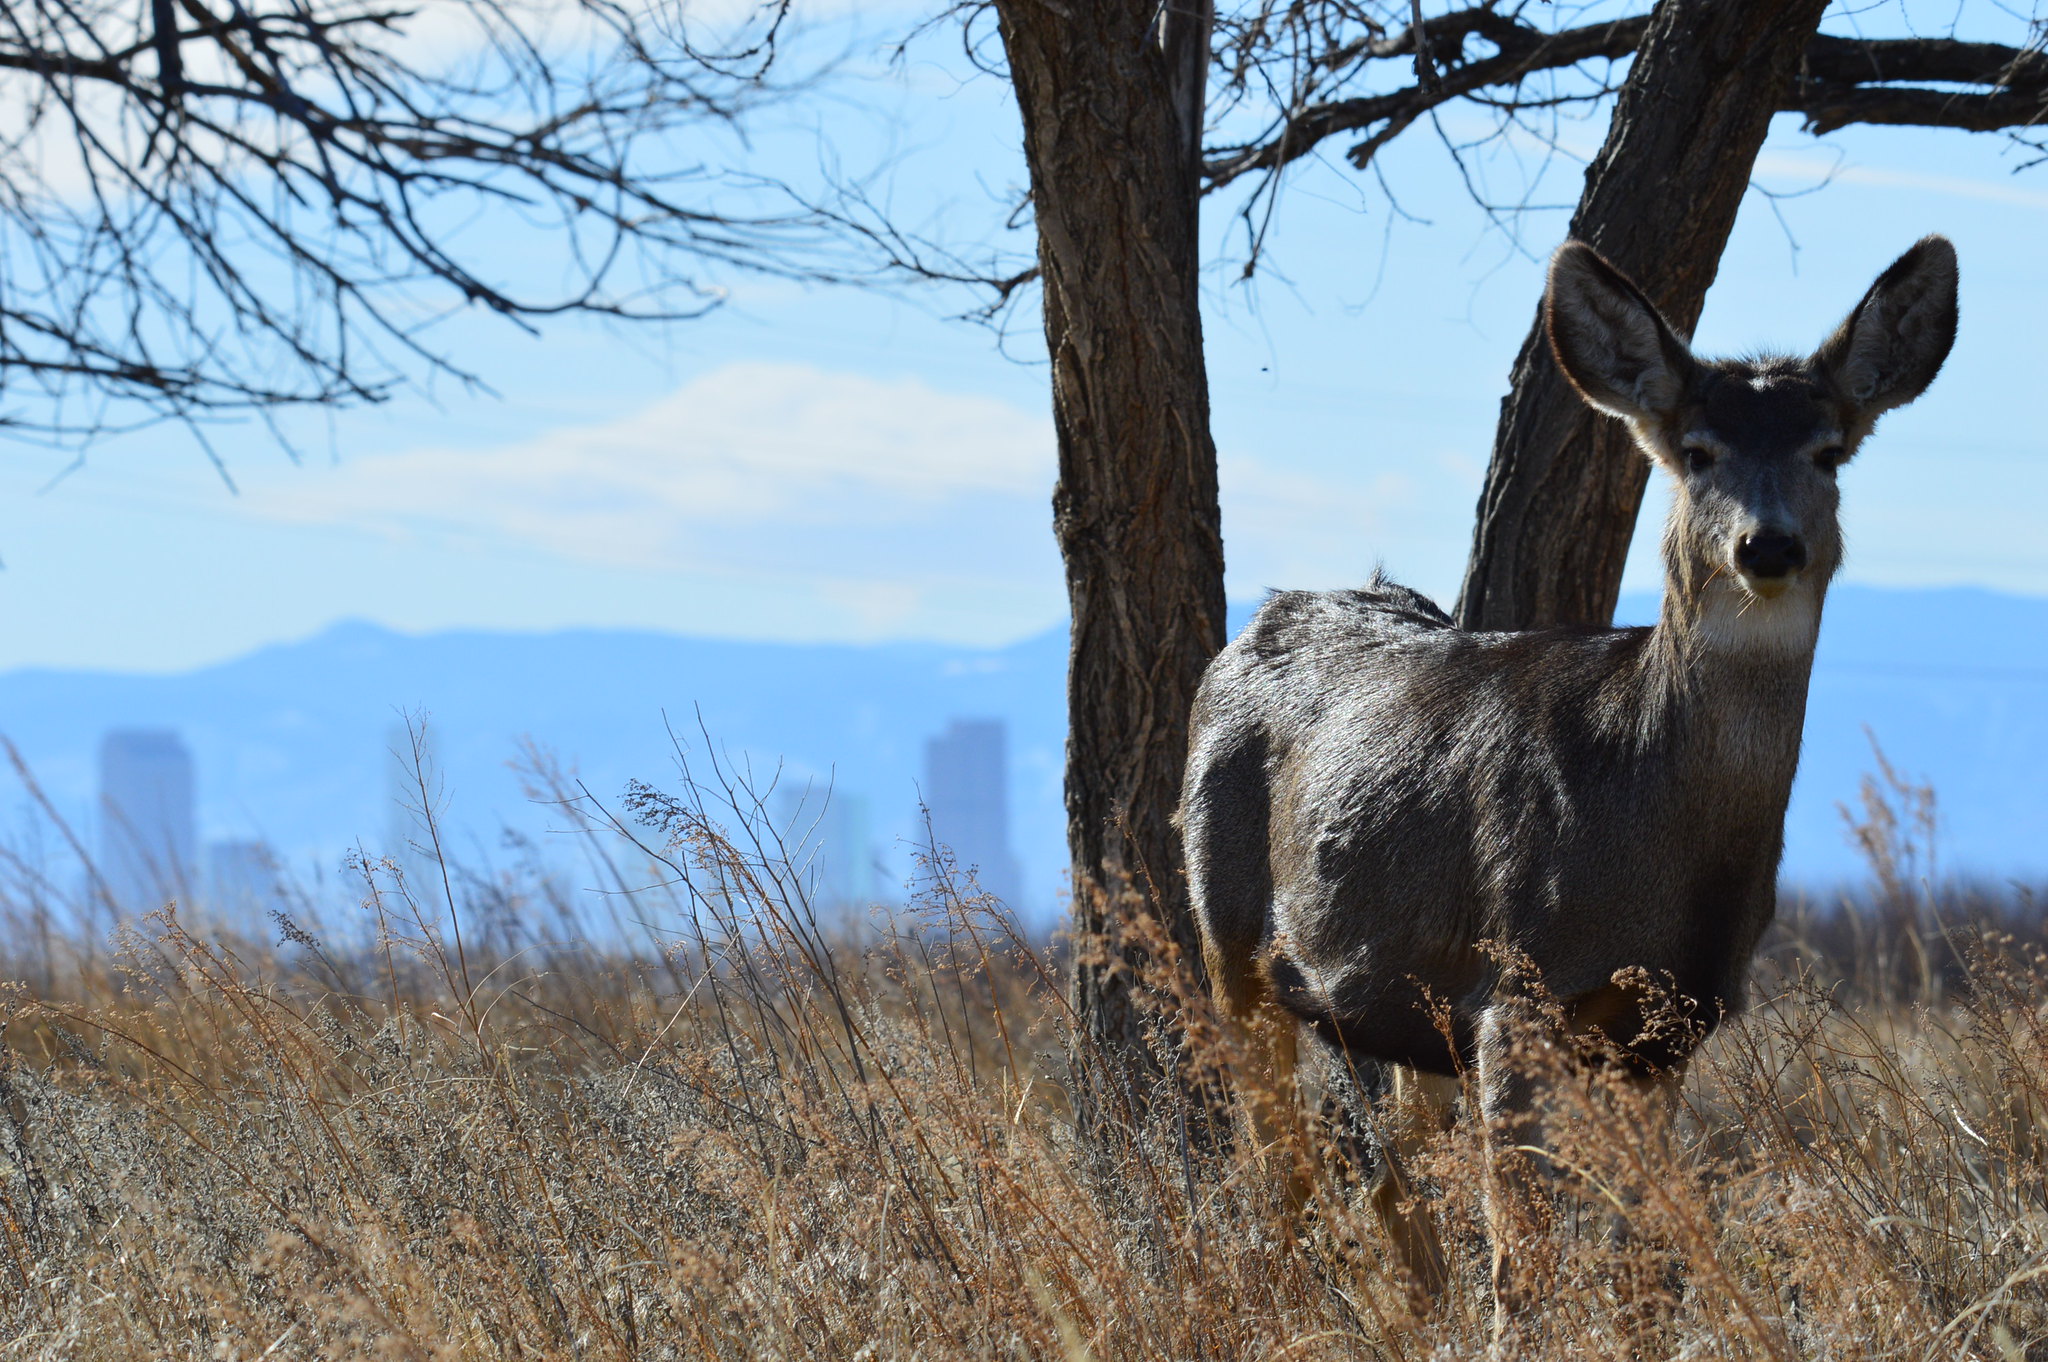 A mule deer stands near a viewer with a city skyline in the background.